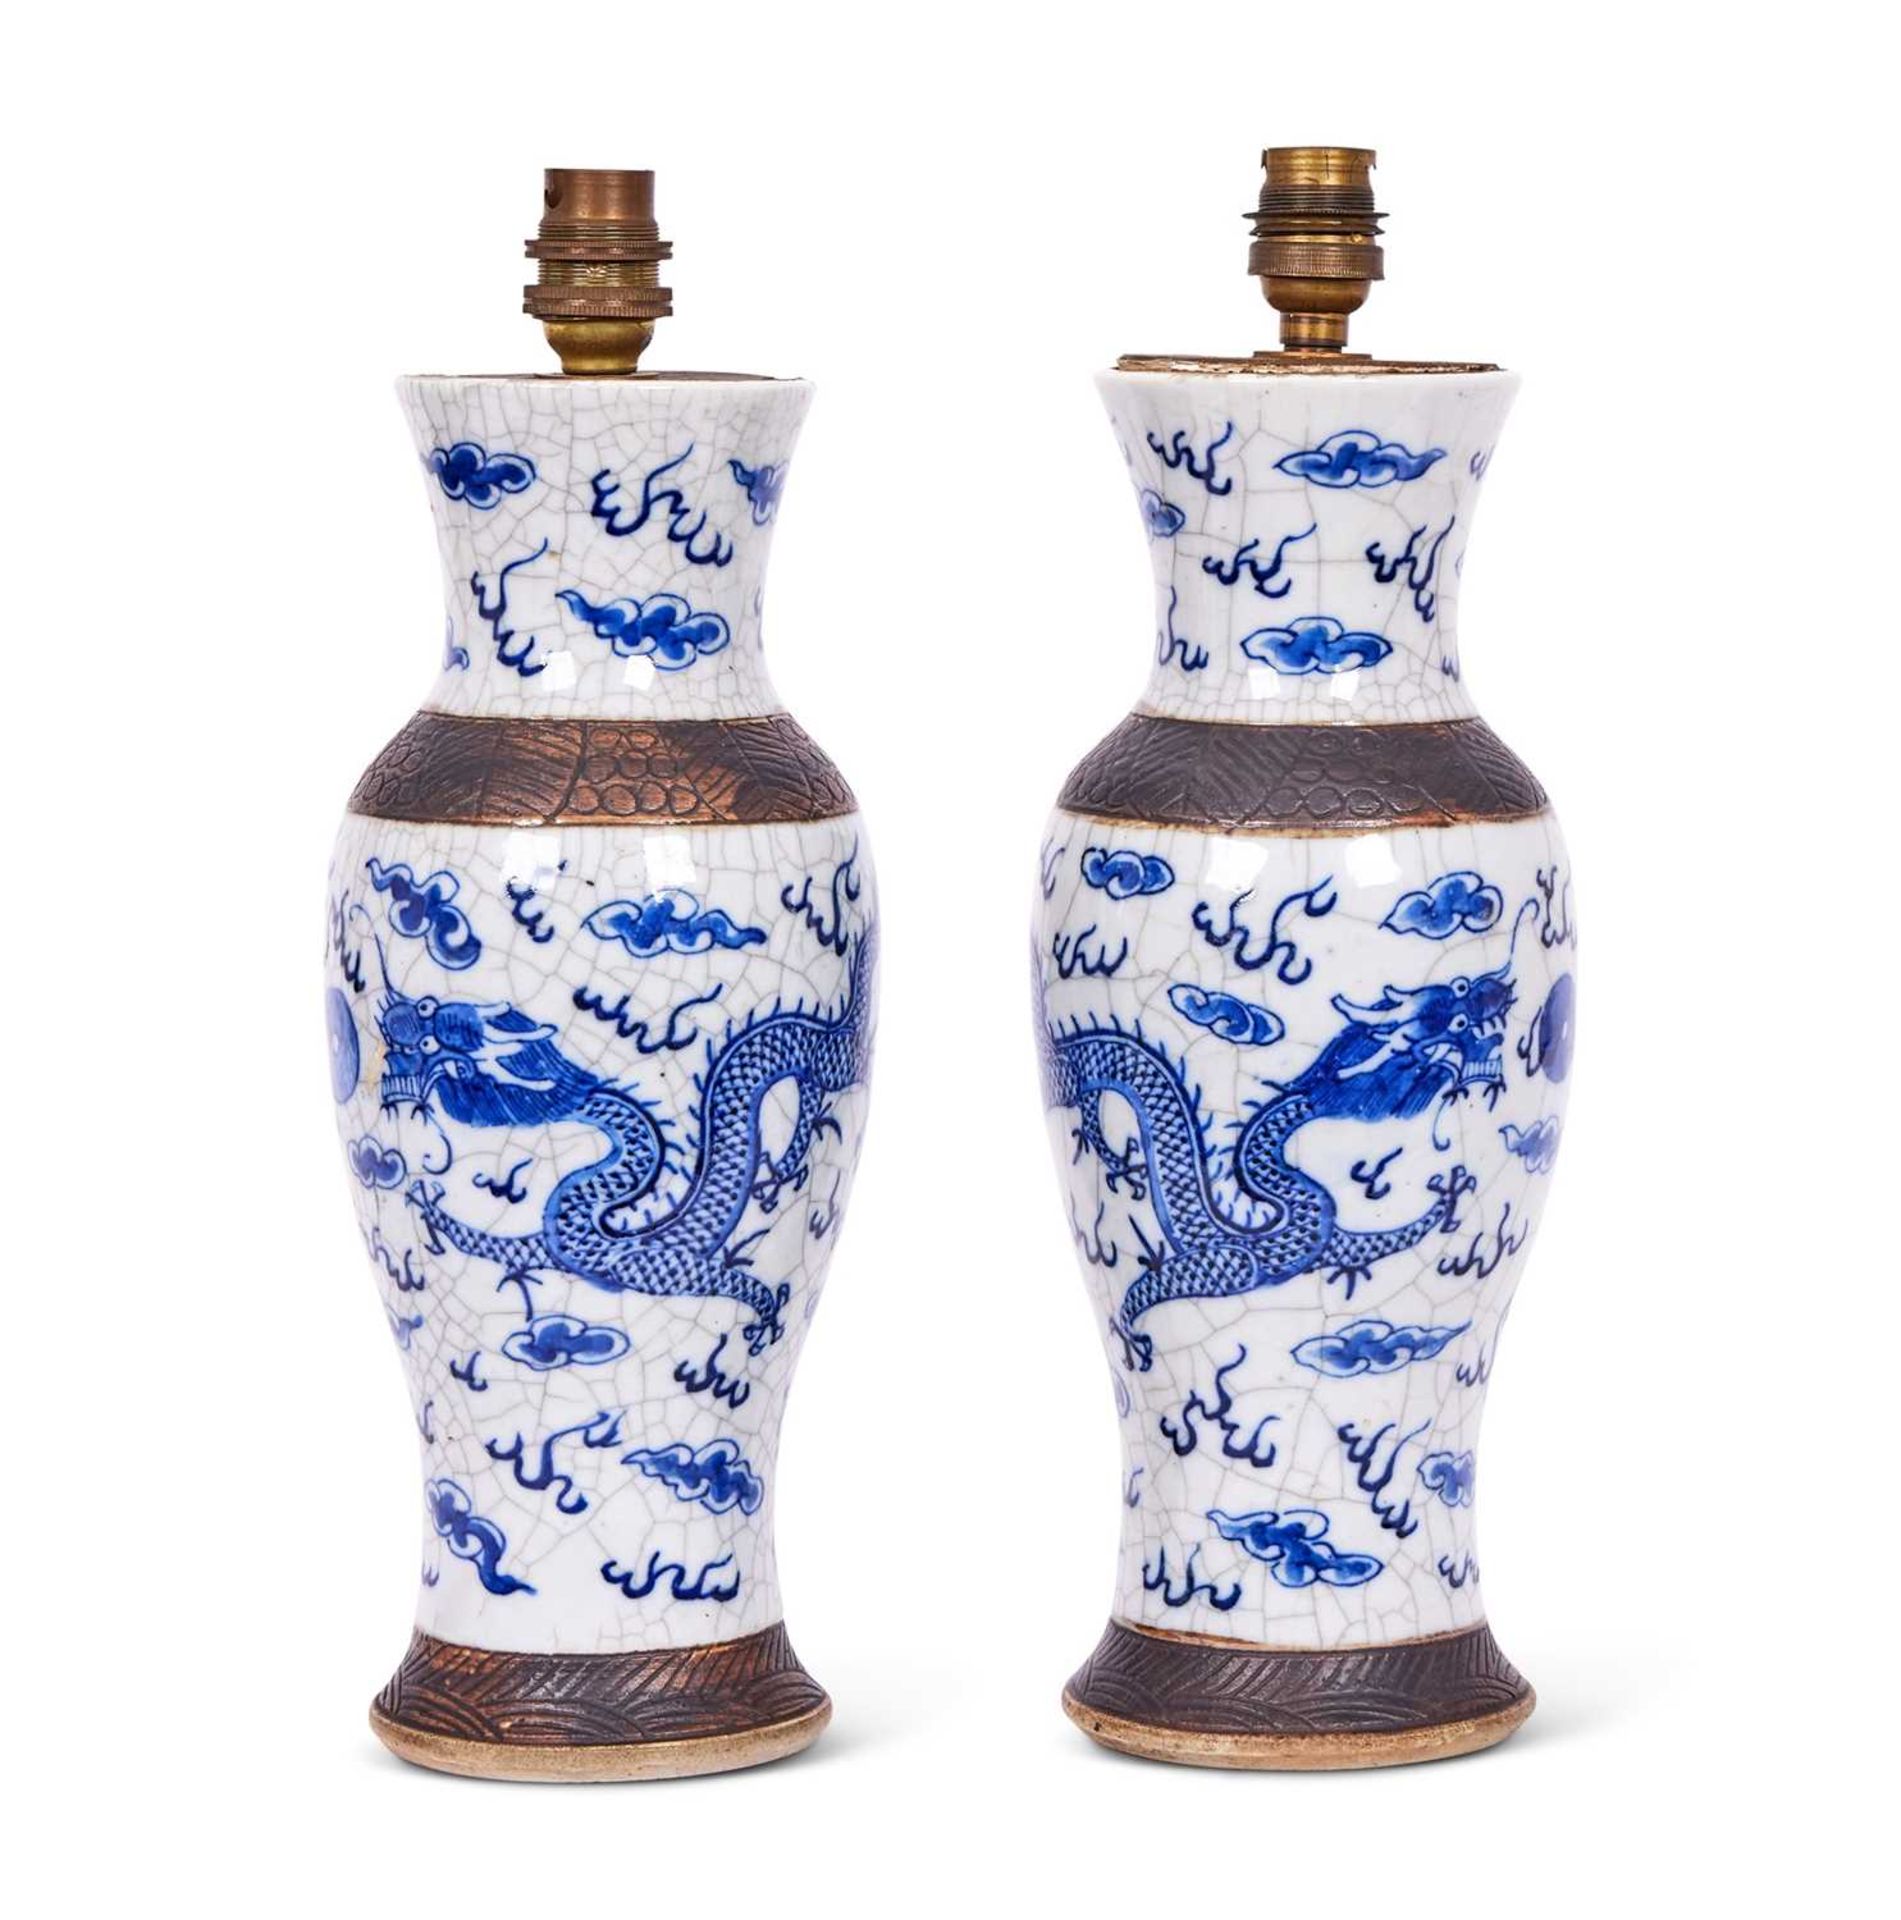 A PAIR OF 19TH CENTURY CHINESE BLUE AND WHITE CRACKLE GLAZE VASE LAMPS - Image 2 of 9